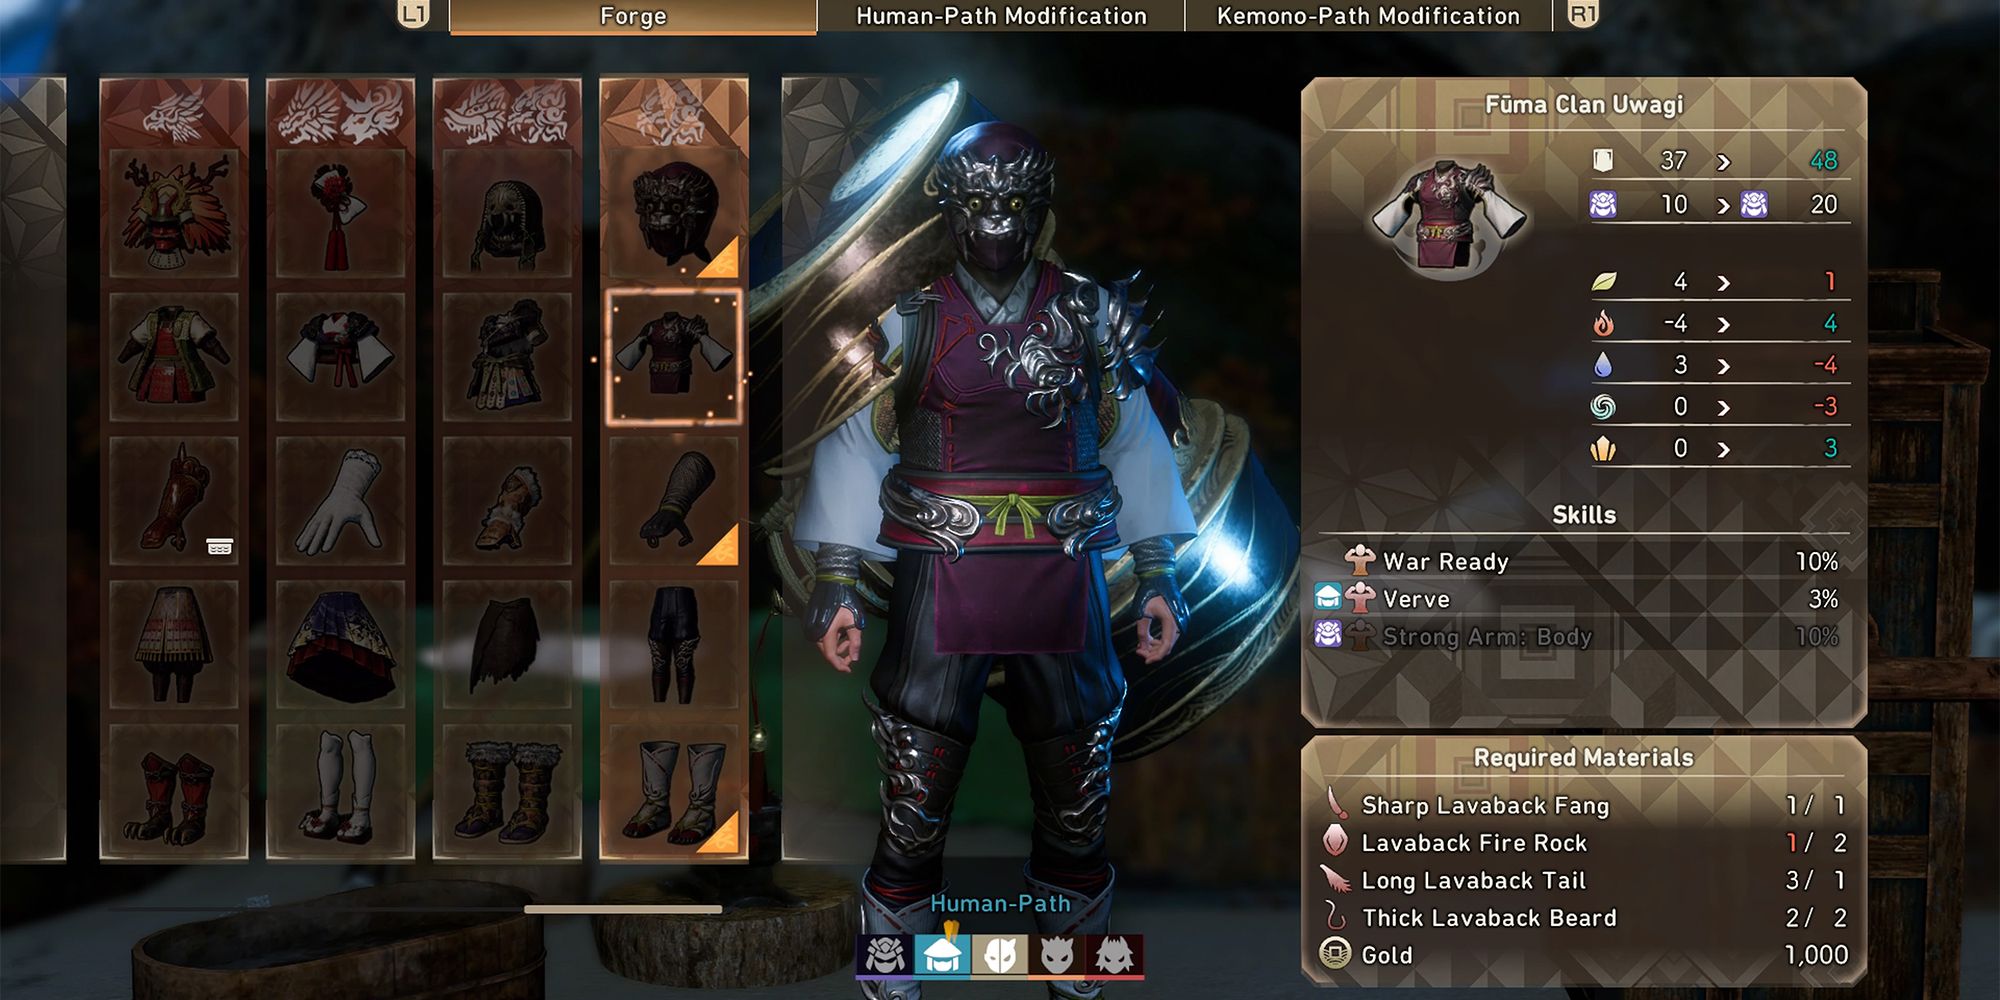 fuma clan armor set crafted from mighty lavaback materials